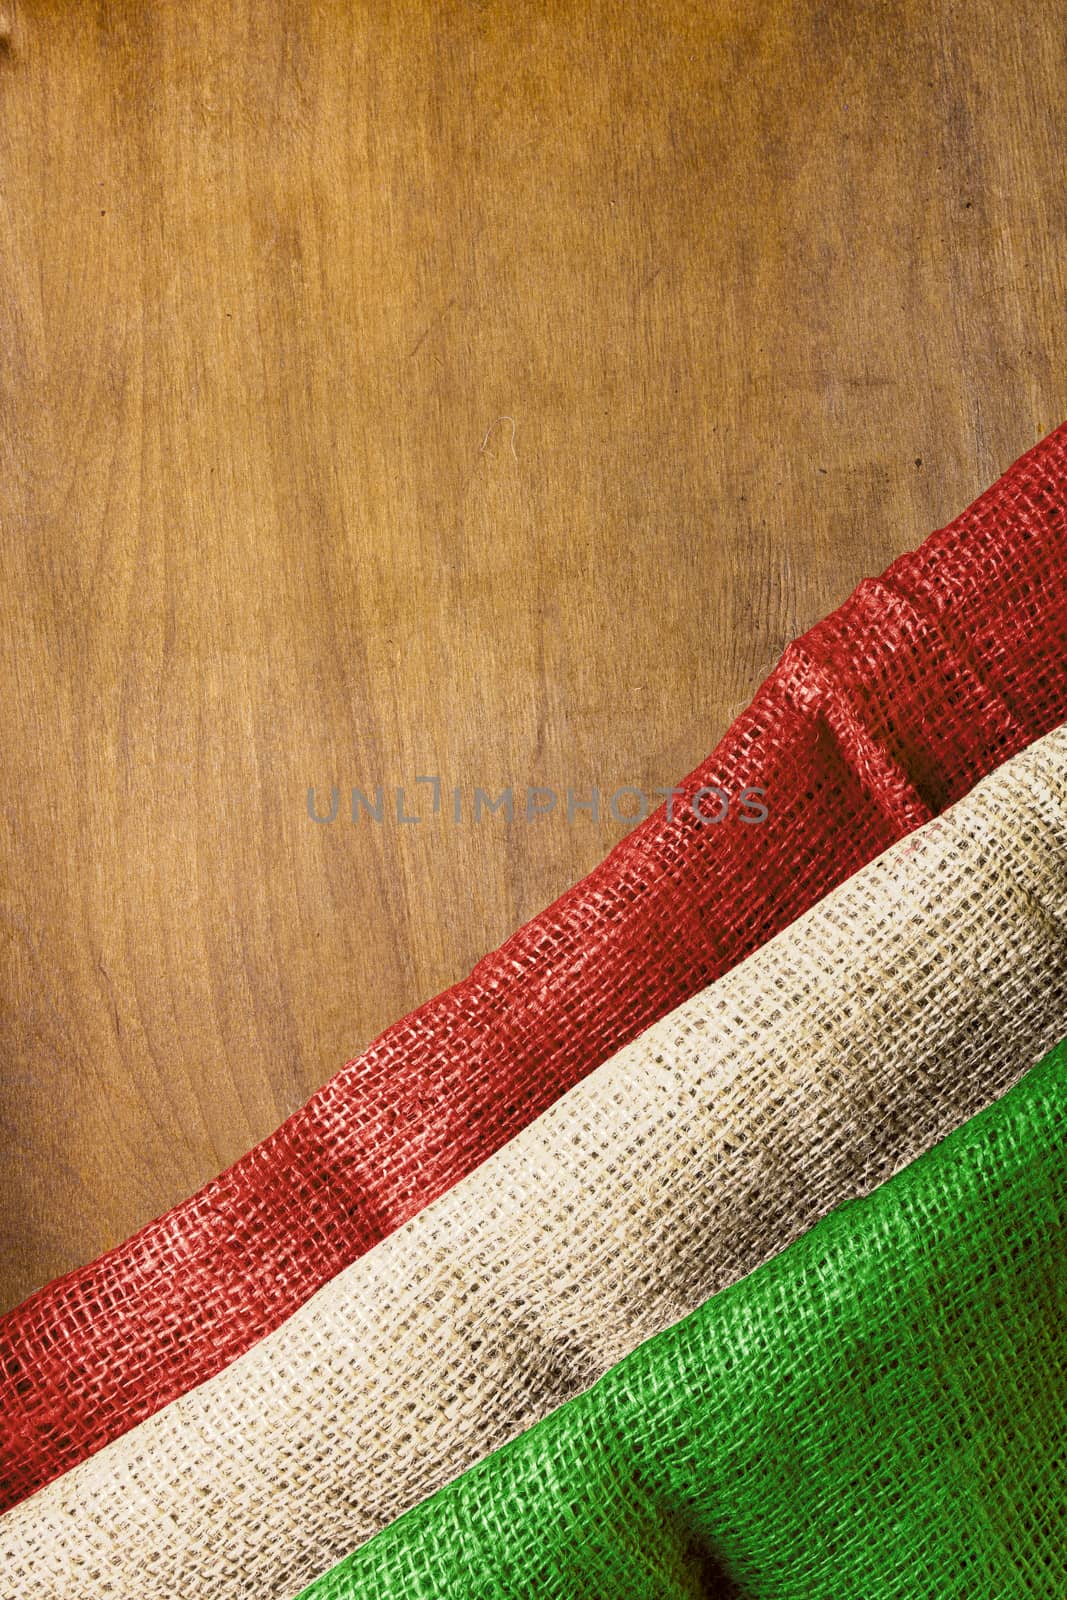 Flag of Hungary on a wooden background of rough fabric.